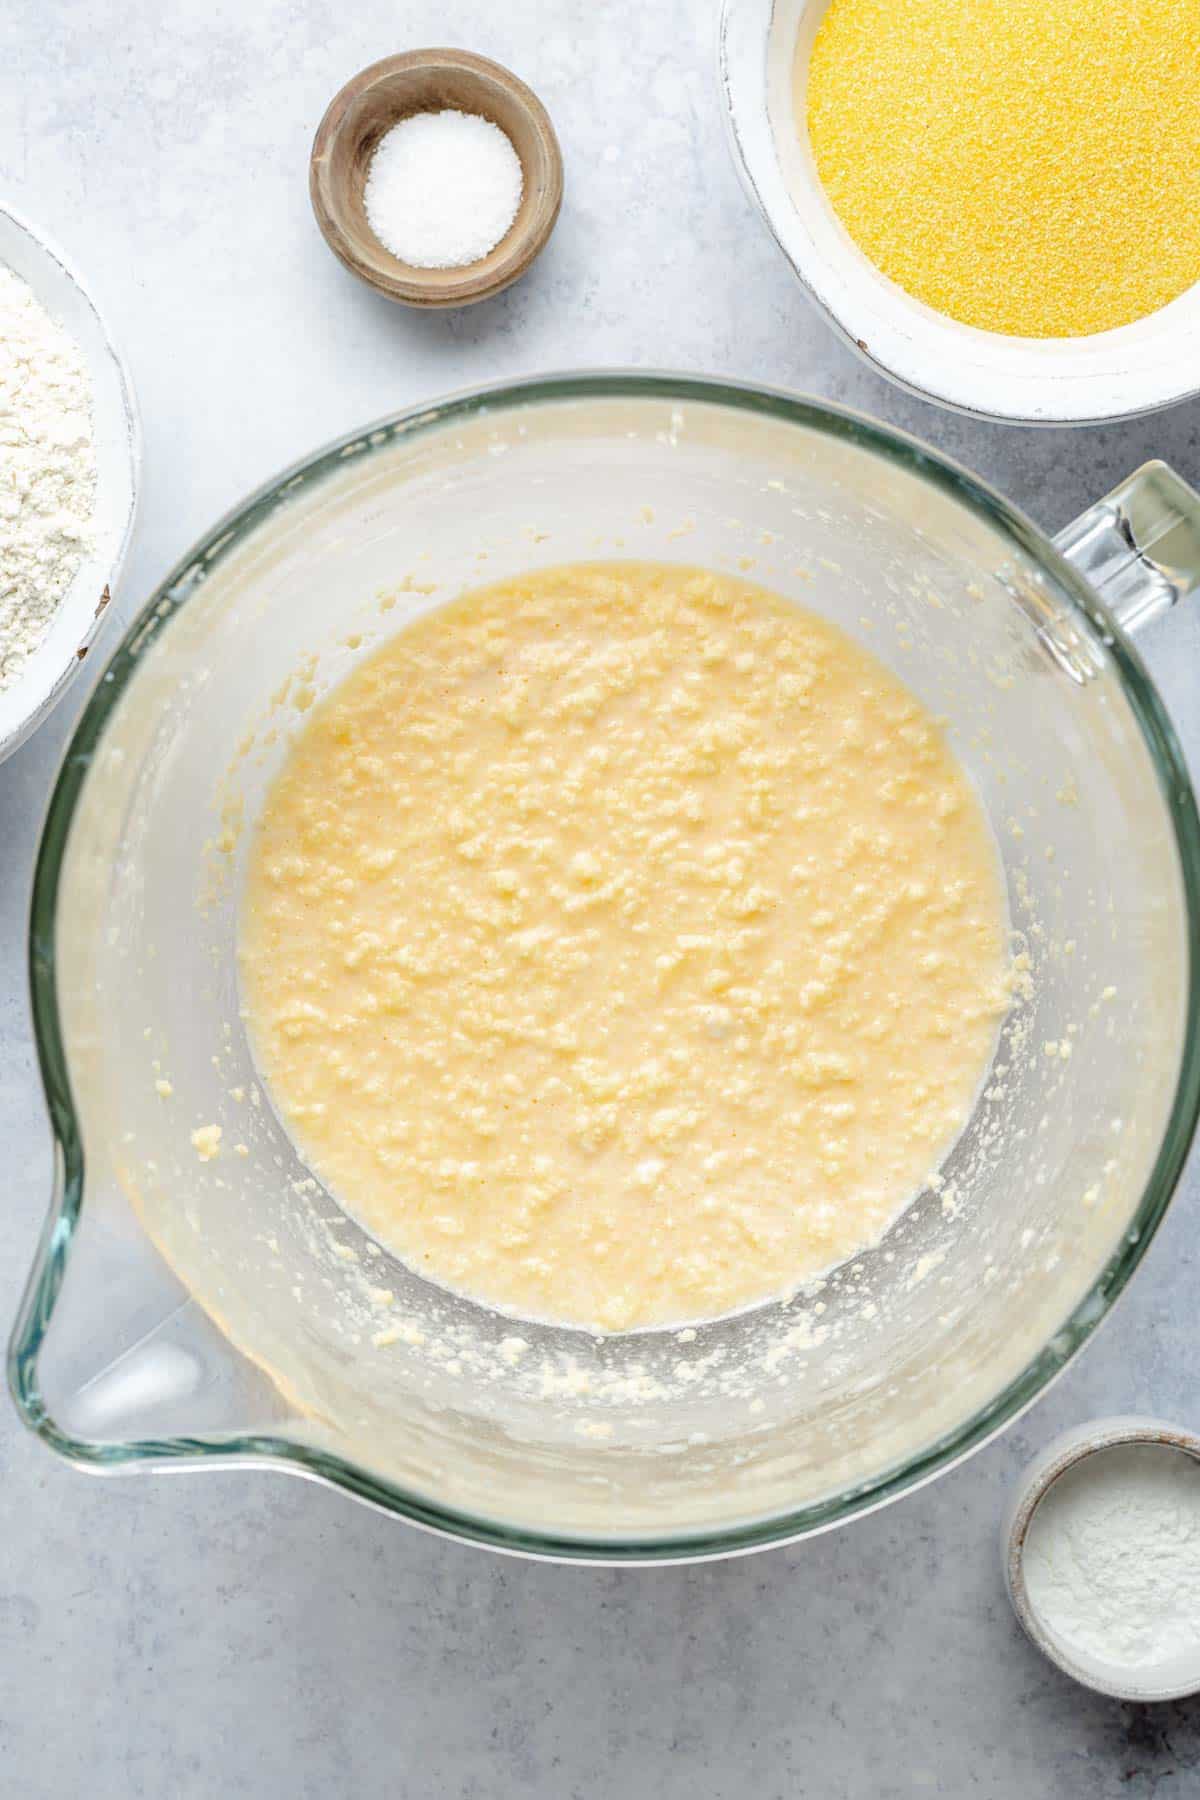 Wet ingredients for cornbread batter in a mixing bowl.